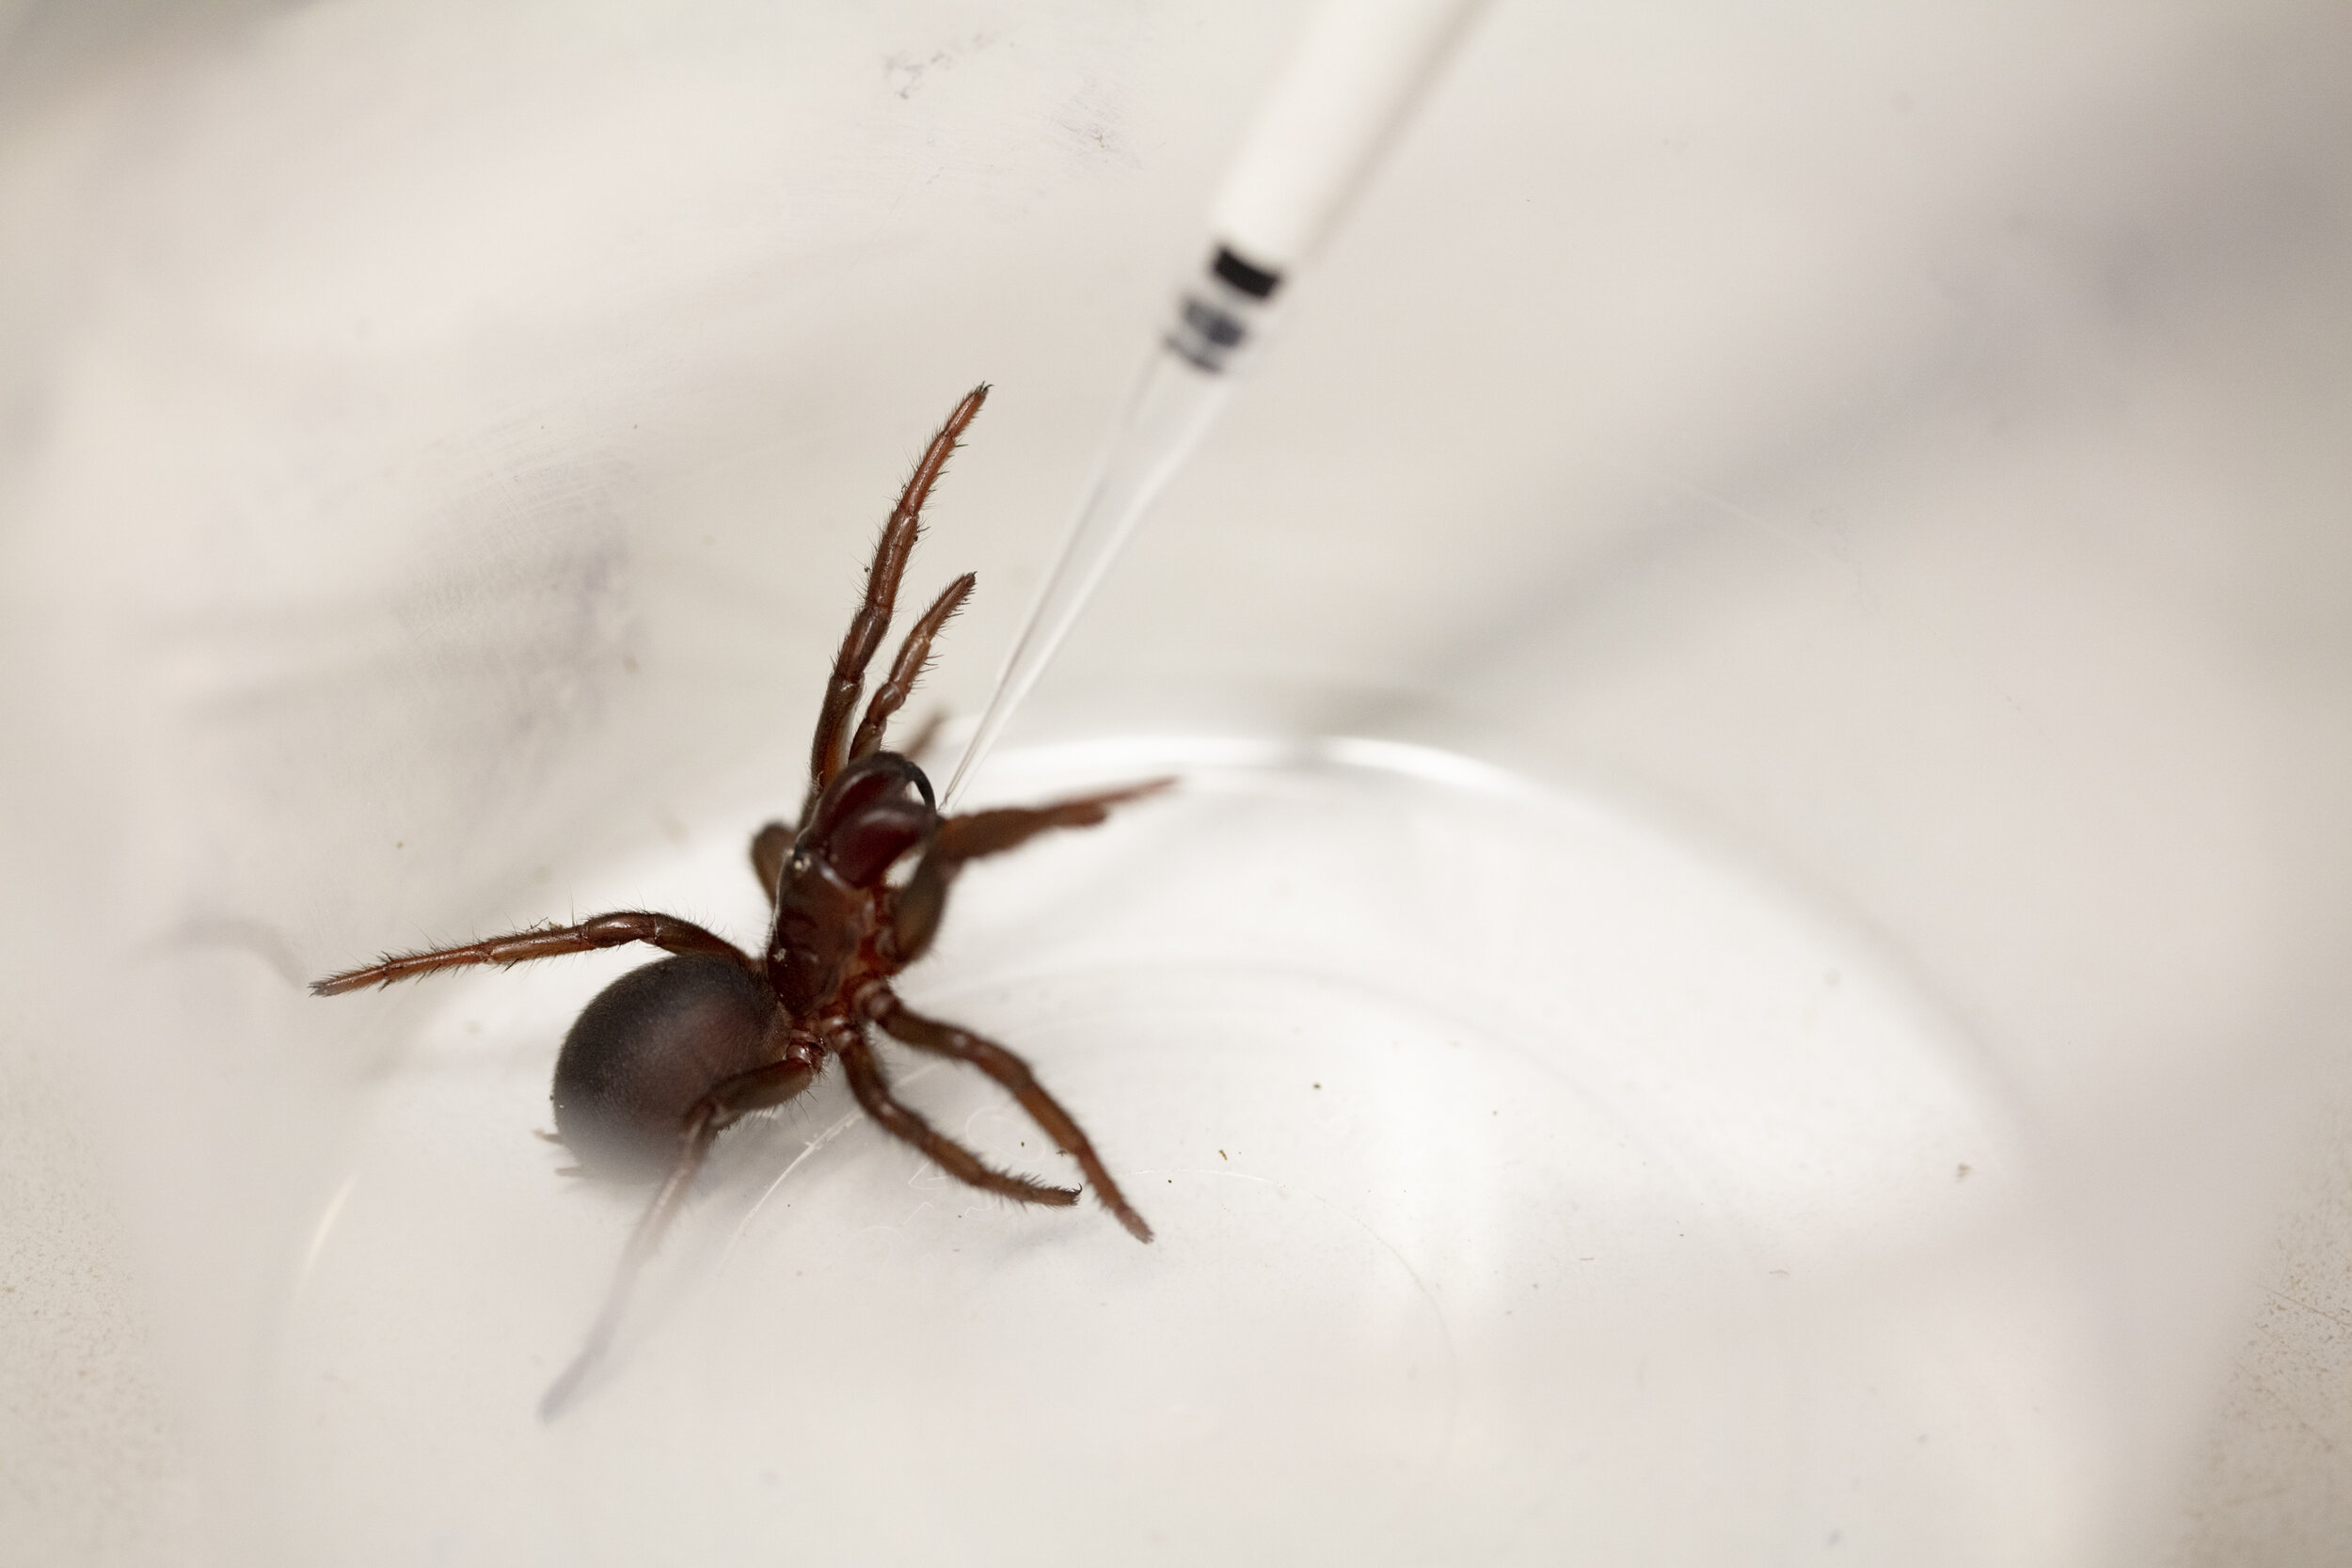  Phd student Sabrina Nolan in  the Insectory Lab at Institute for Molecular BioscienceThe University of Queensland.This is a Sydney funnel web spider" Clementine" in the process of being milked for Venom.A Papette is used to provoke the spider to str